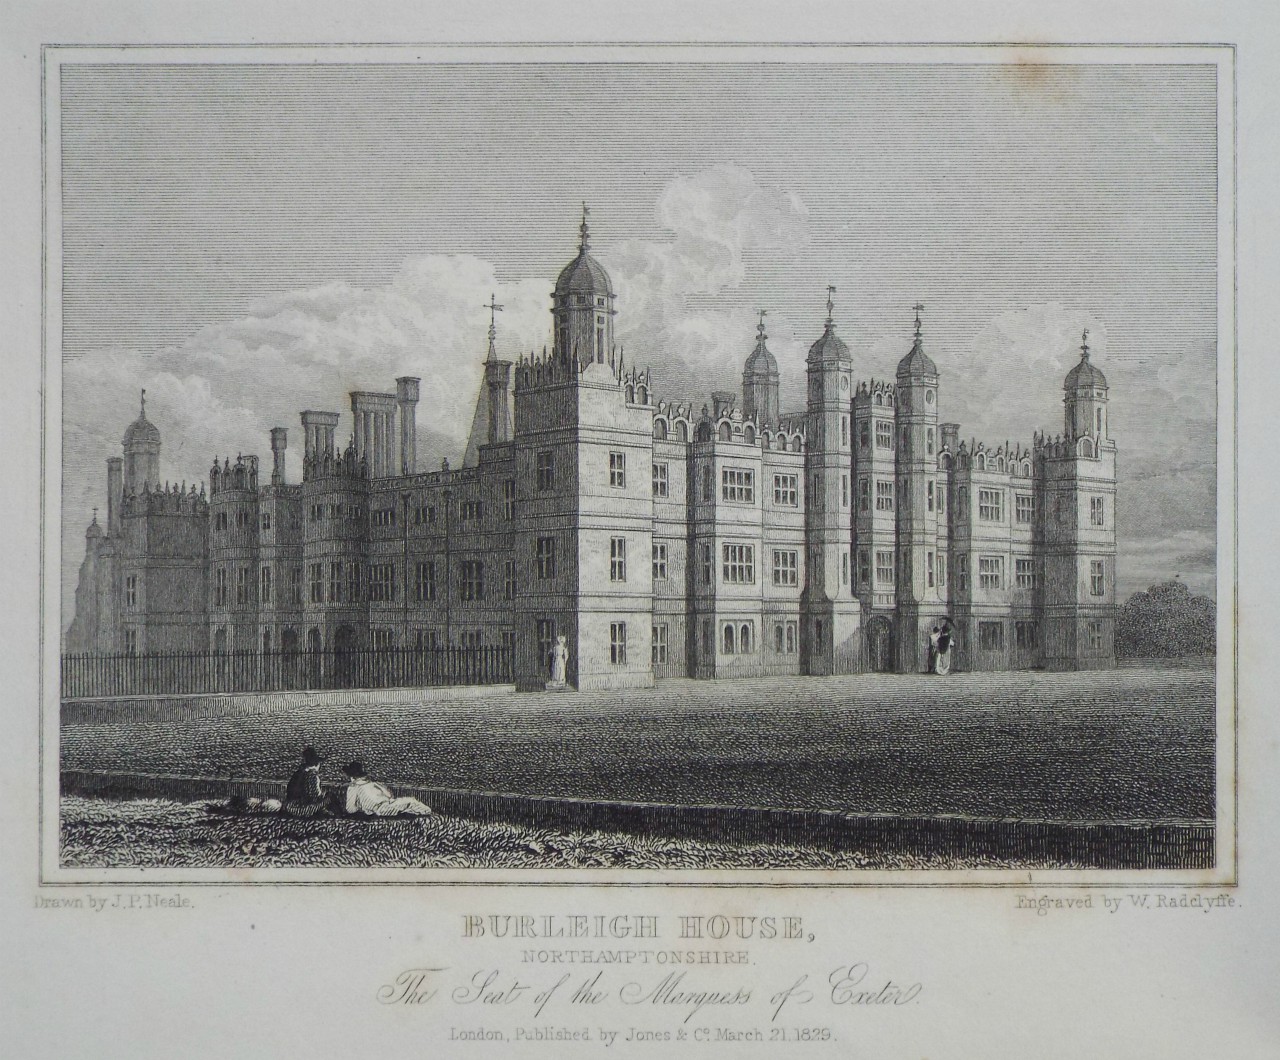 Print - Burleigh House, Northamptonshire. The Seat of the Marquess of Exeter. - Radclyffe